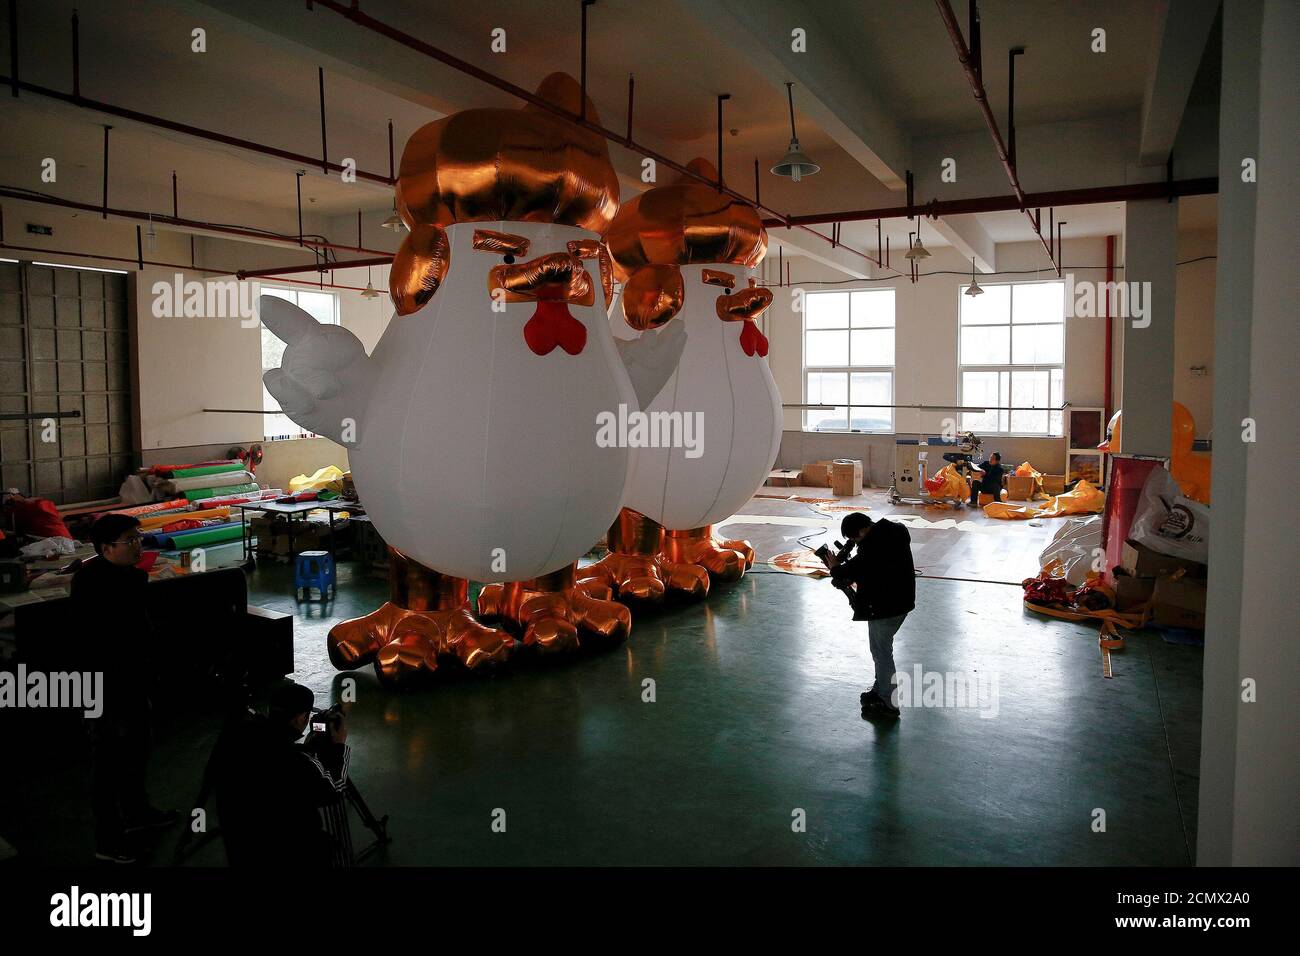 A cameraman films an inflatable chicken that local media say bears resemblance to U.S. President-elect Donald Trump as a Chinese factory braces for the Year of the Rooster in Jiaxing, Zhejiang province, China January 12, 2017. REUTERS/Aly Song Stock Photo